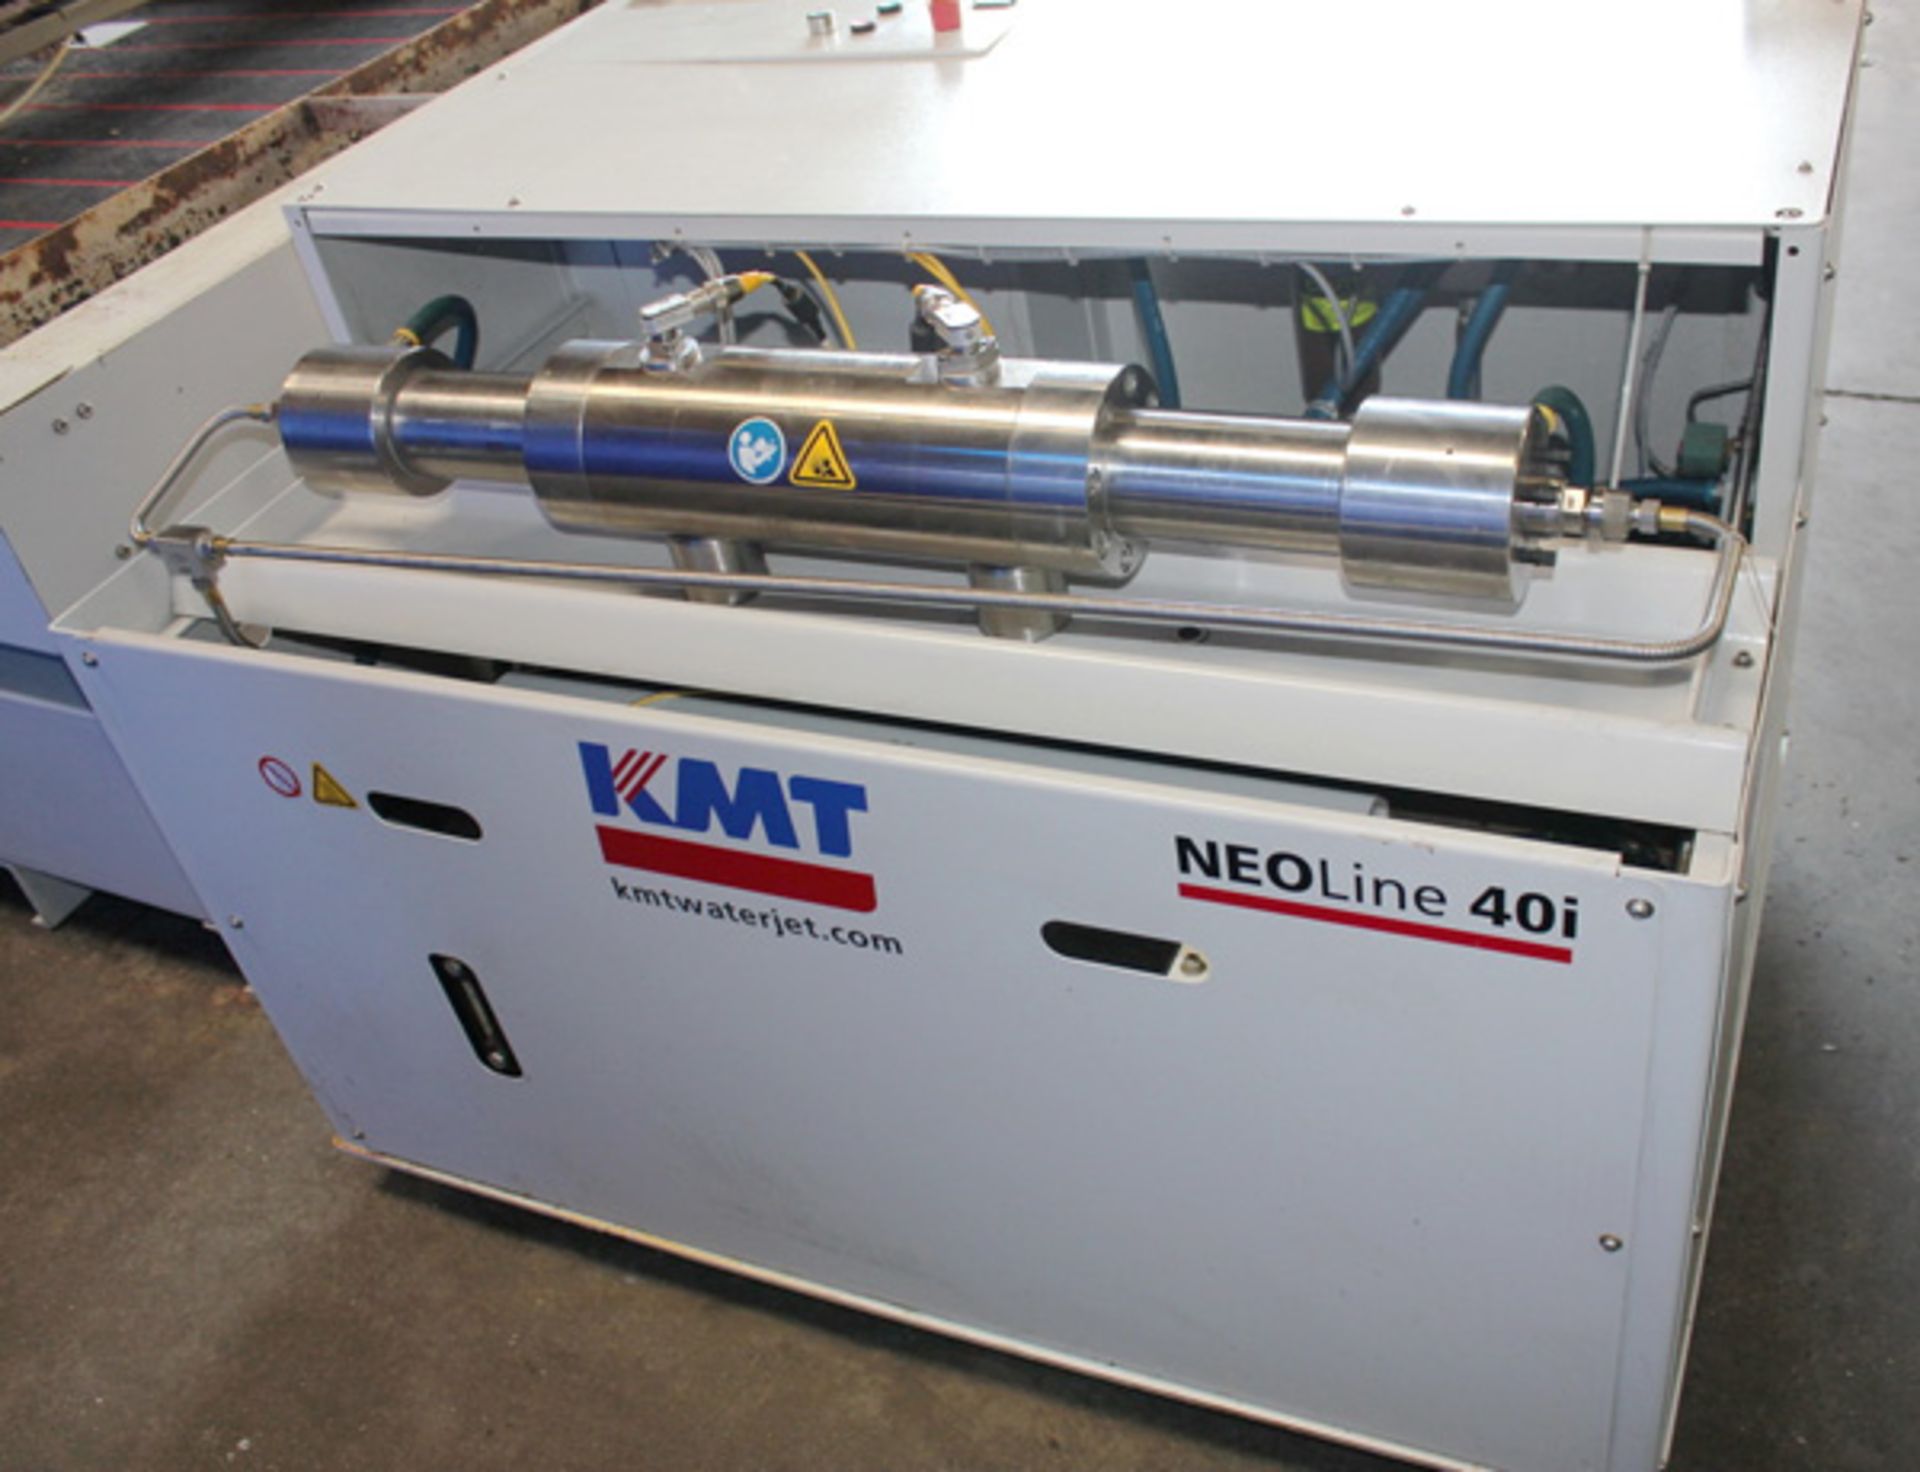 2013 Multicam CNC Water Jet | 120" x 60" x 3.5", Mdl: V-204, S/N: V-204-W09724 - 8446HP - Image 12 of 23